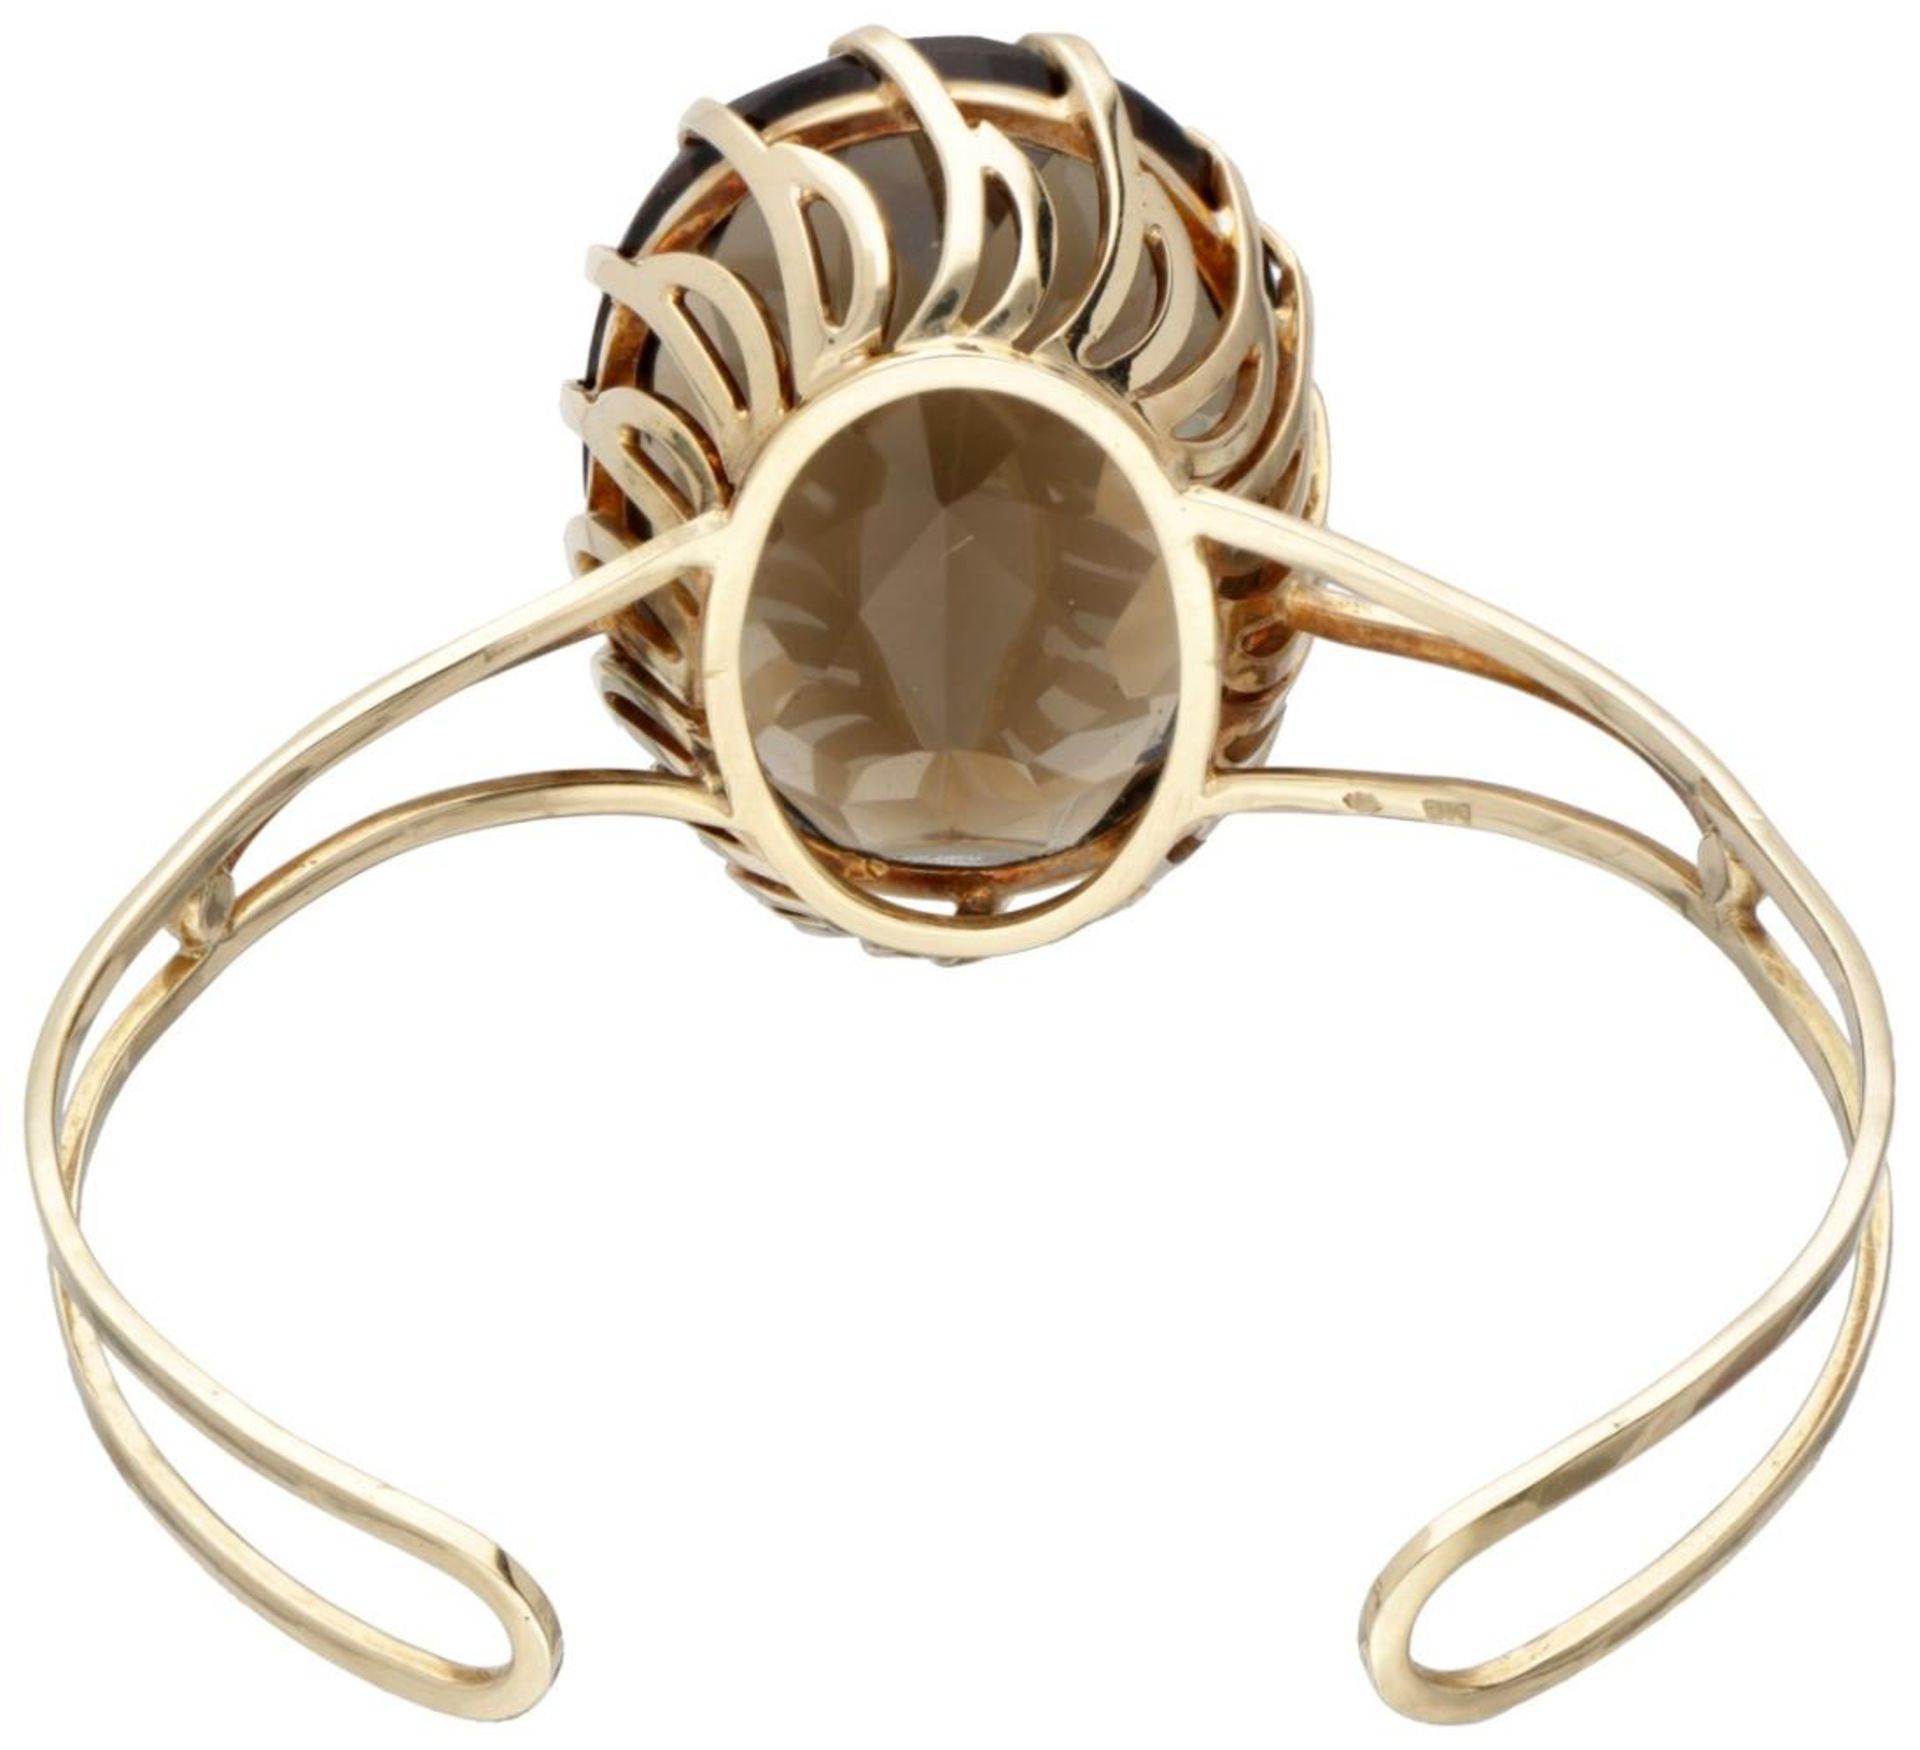 14K. Yellow gold cuff bracelet set with approx. 78.89 ct. smoky quartz. - Image 6 of 6